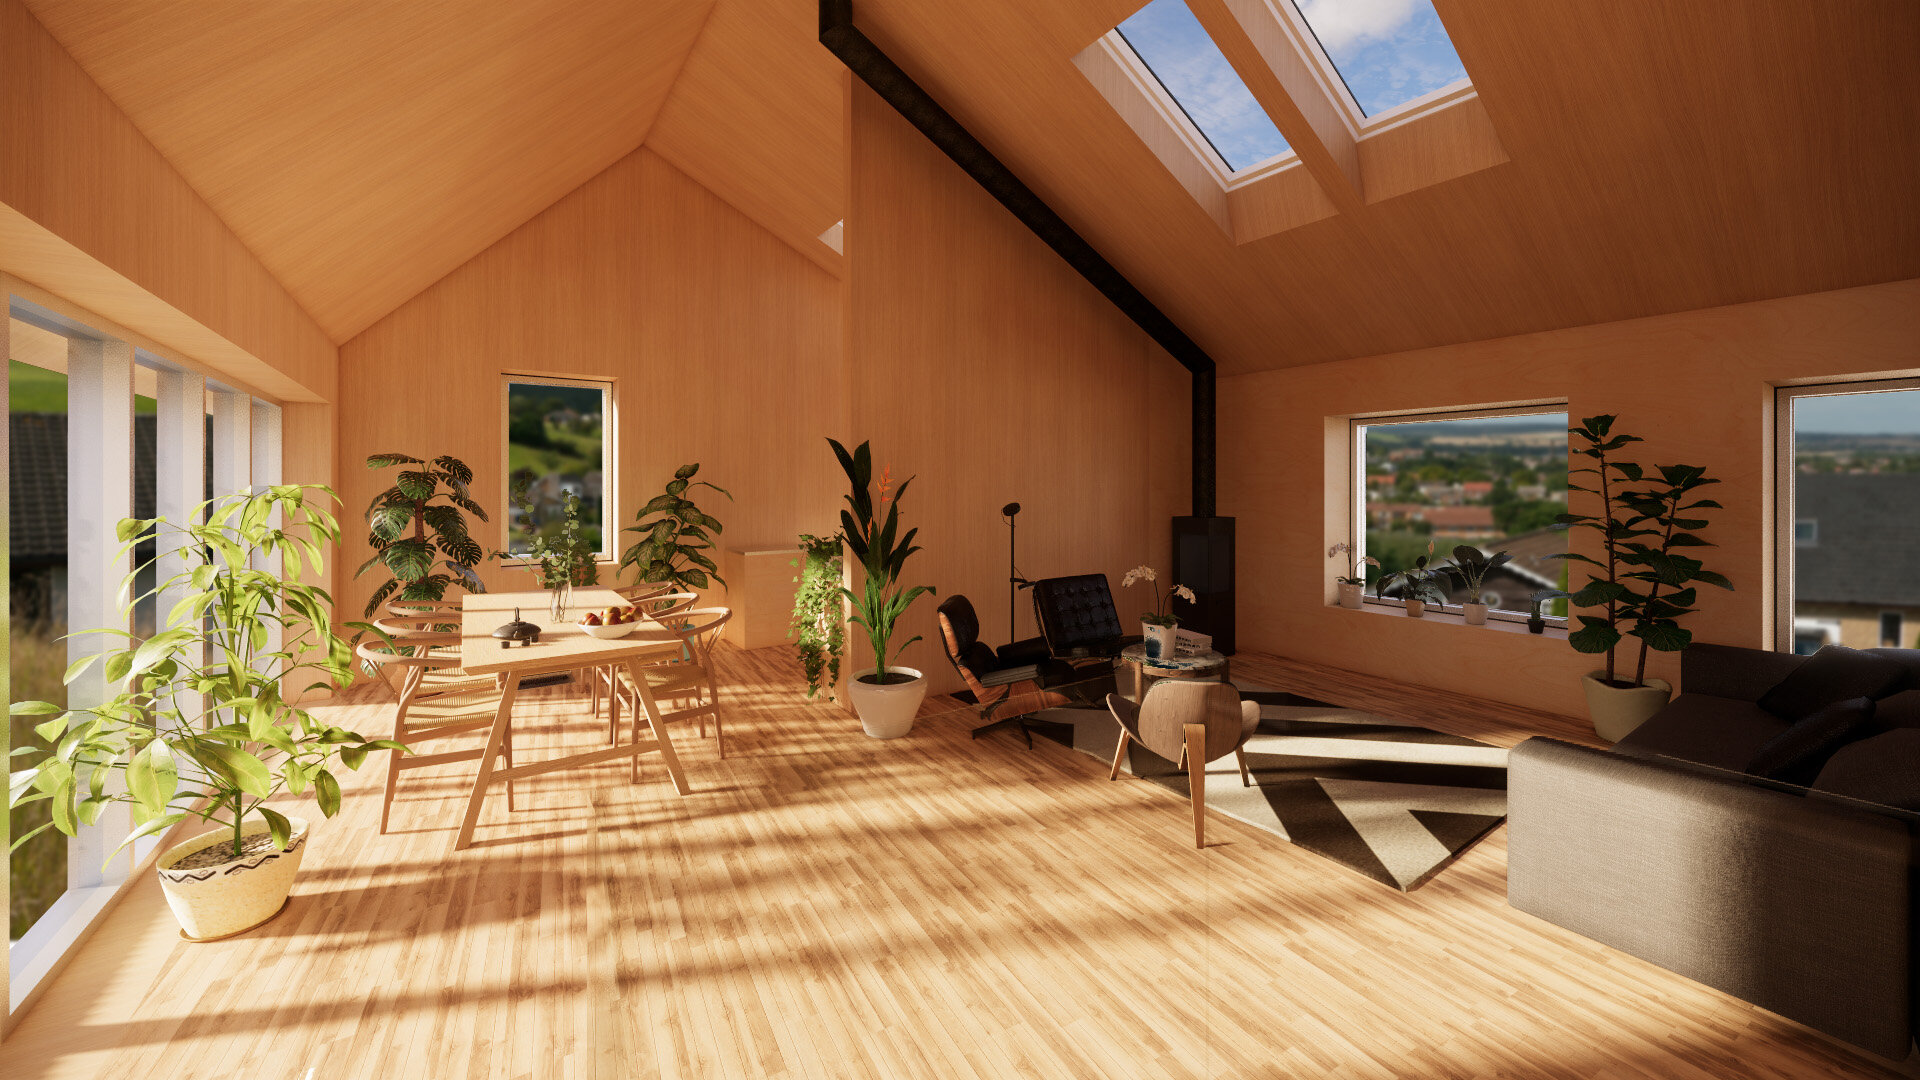 Scarborough Passivhaus - Sustainable Architects in Yorkshire - Samuel Kendall Associates